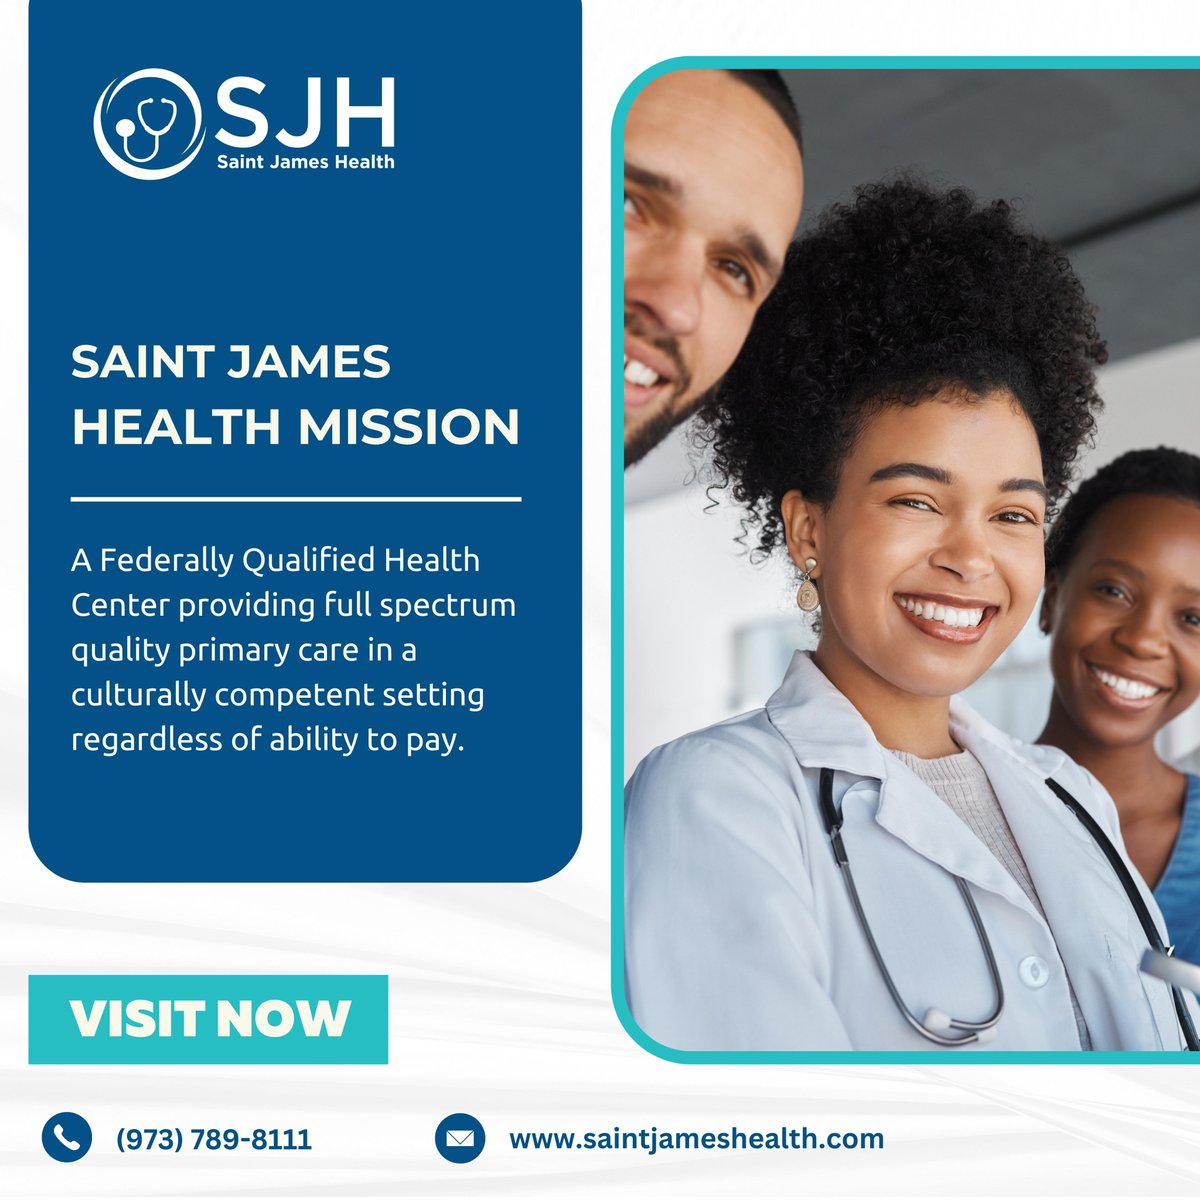 Embark on a wellness journey with Saint James Health Mission – your path to holistic well-being.

#saintjameshealth #wellnessjourney #holistichealth #mindbodysoul #healthmission #naturalliving #lifestylewellness #healthychoices #selfcare #empoweryourhealth #newarkhealth #newarknj